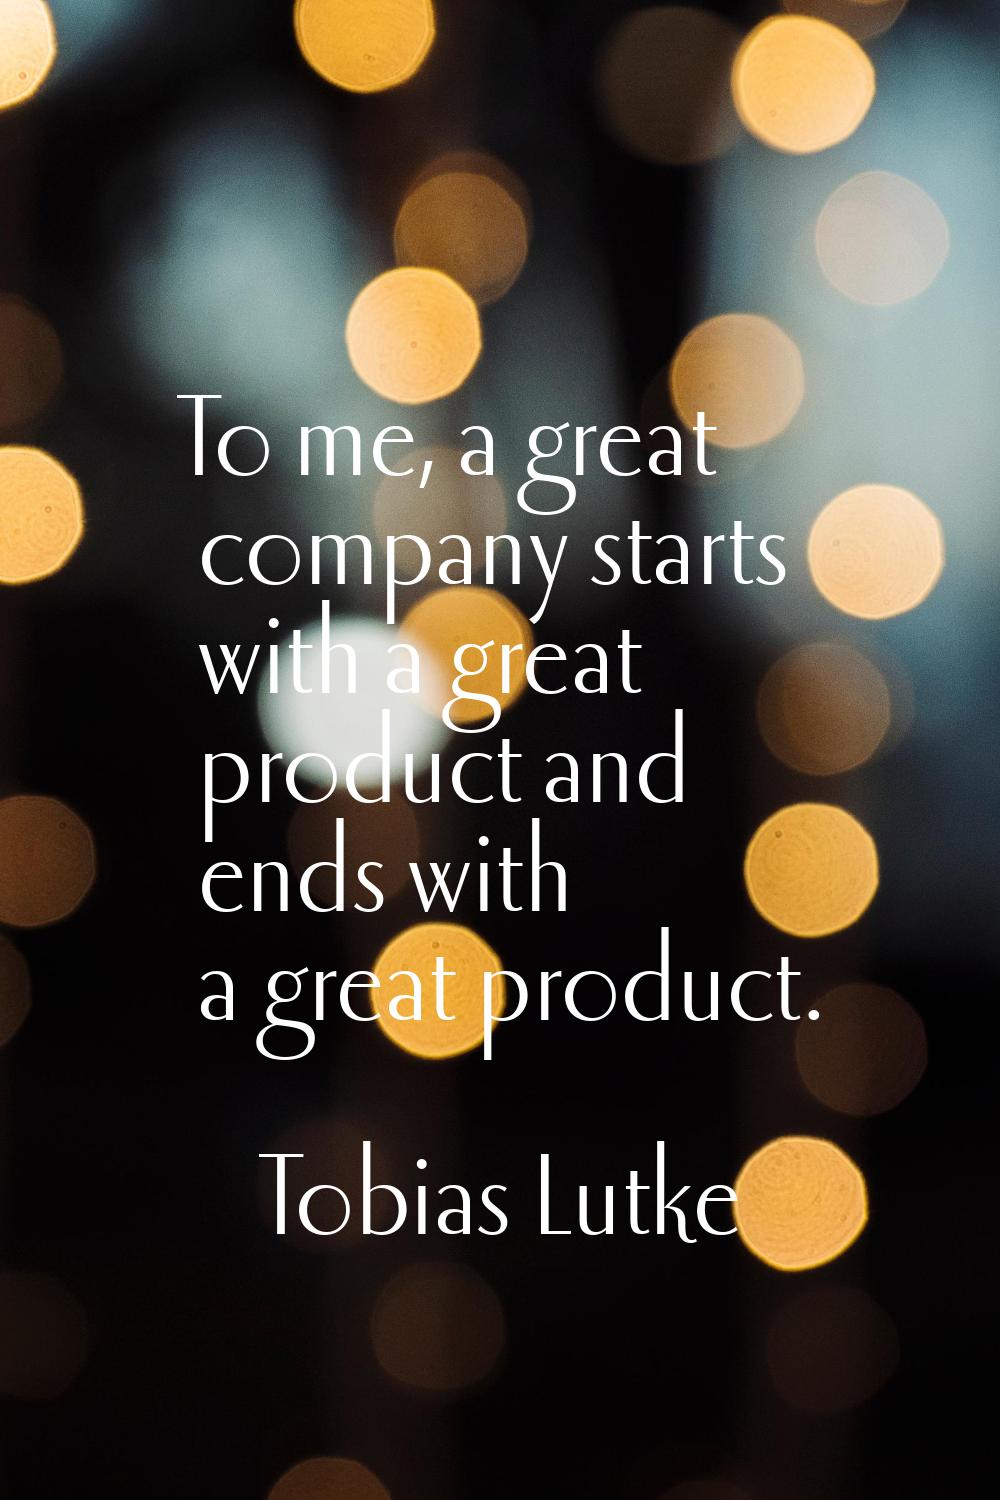 To me, a great company starts with a great product and ends with a great product.